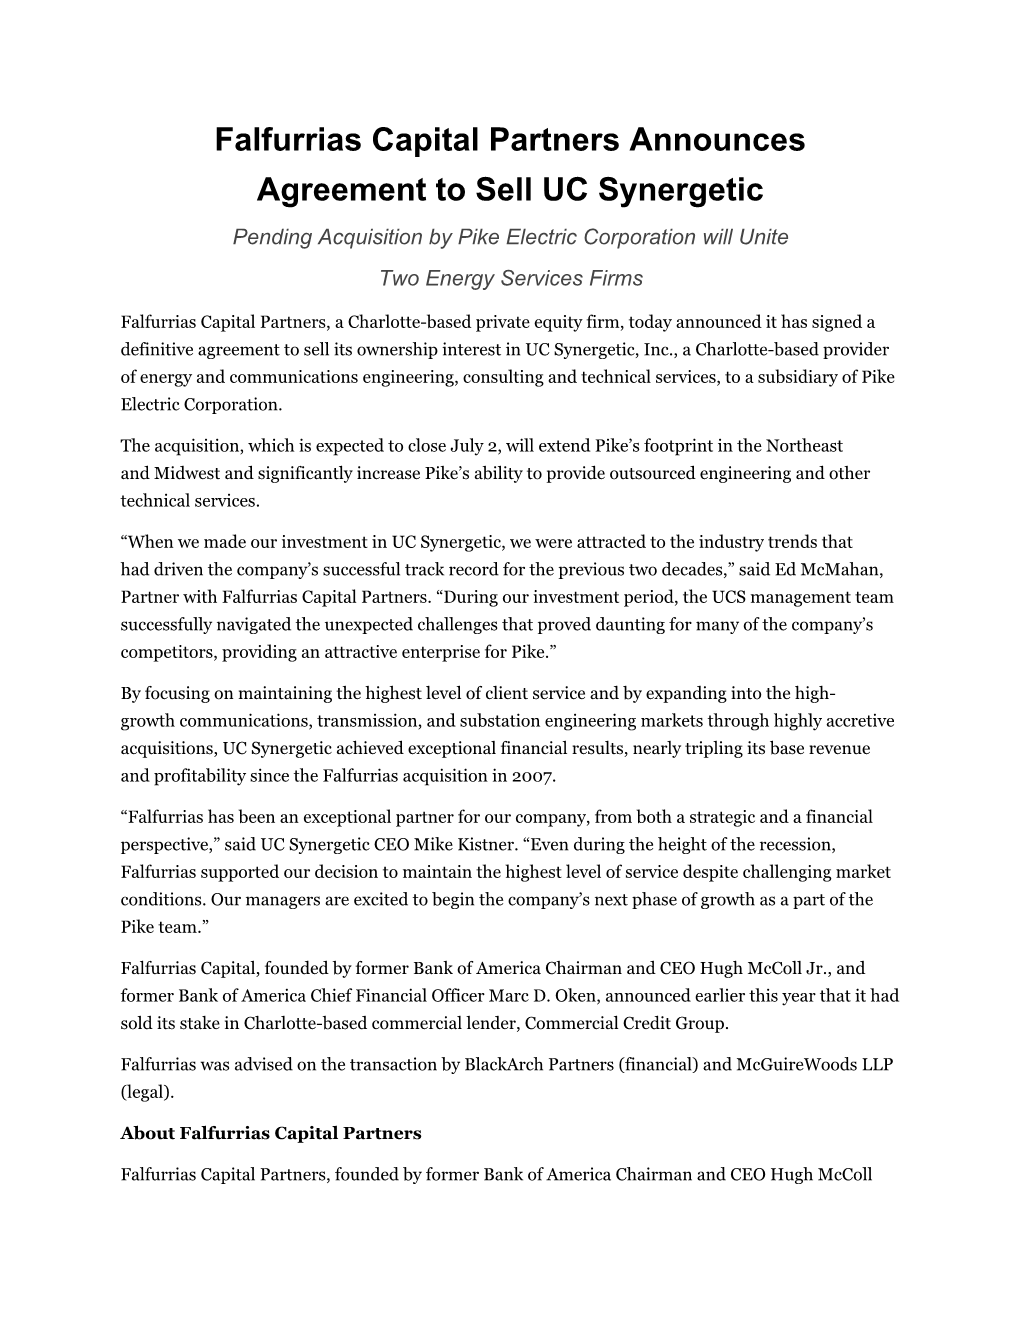 Falfurrias Capital Partners Announces Agreement to Sell UC Synergetic